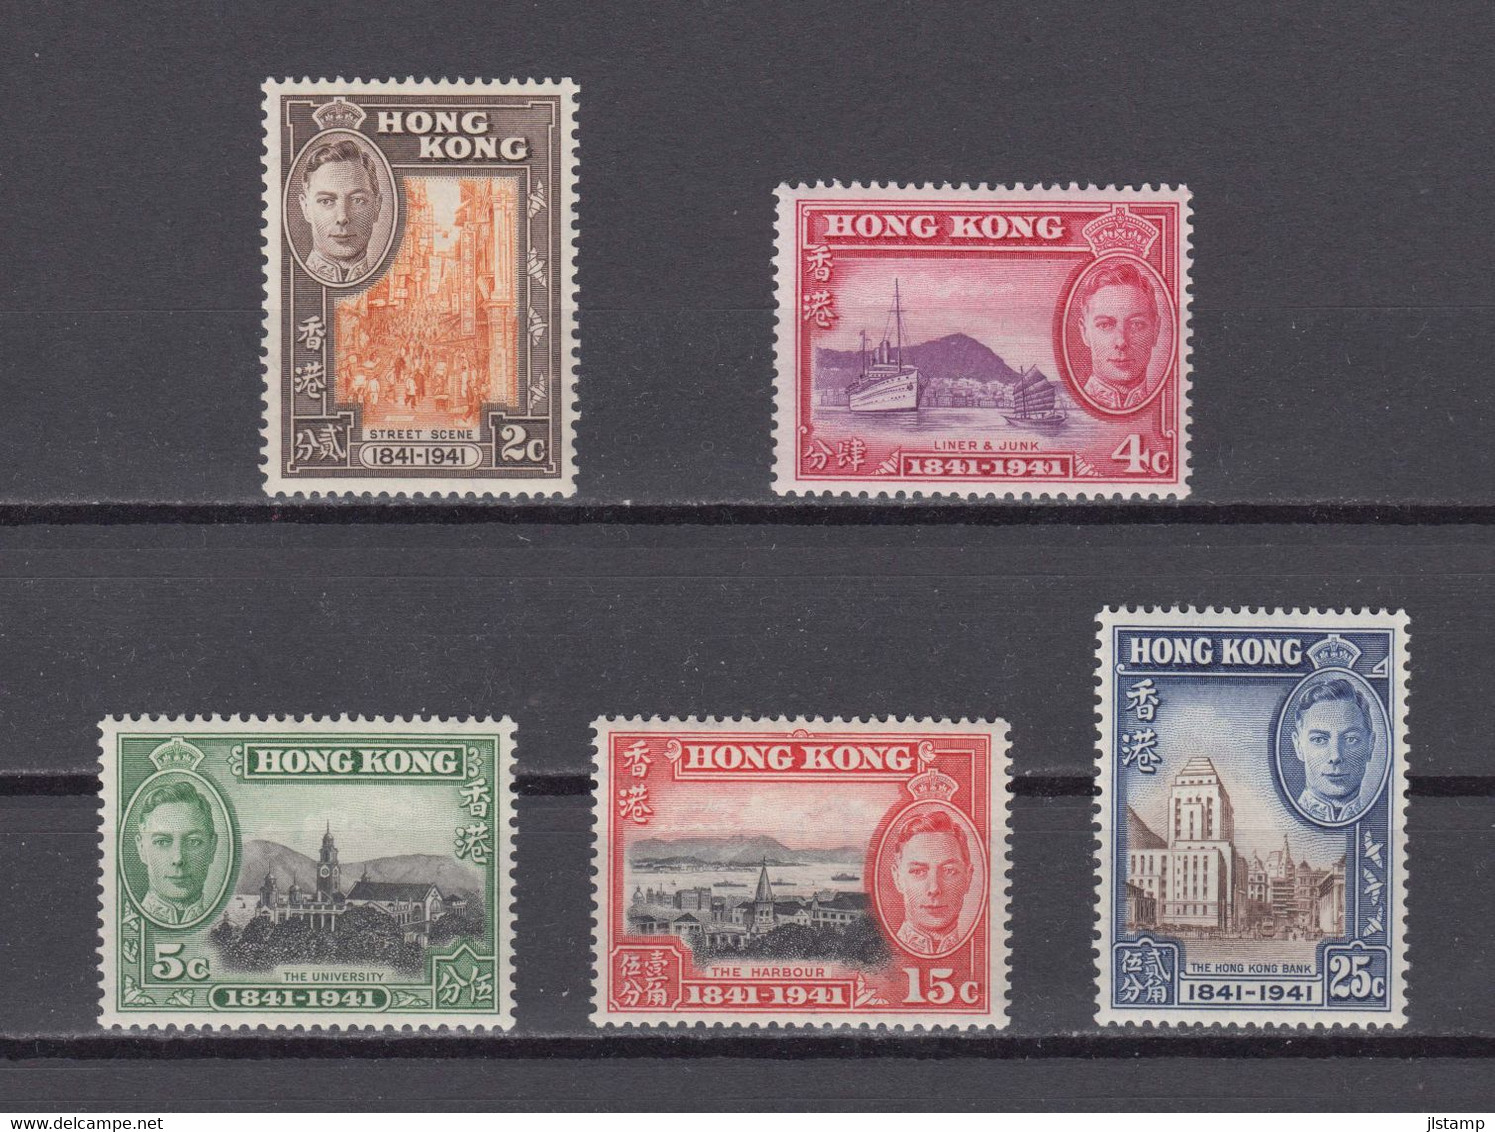 Hong Kong 1941 Centenary Stamps 5 Values,Scottl# 168-172, MNH,VF - Unused Stamps